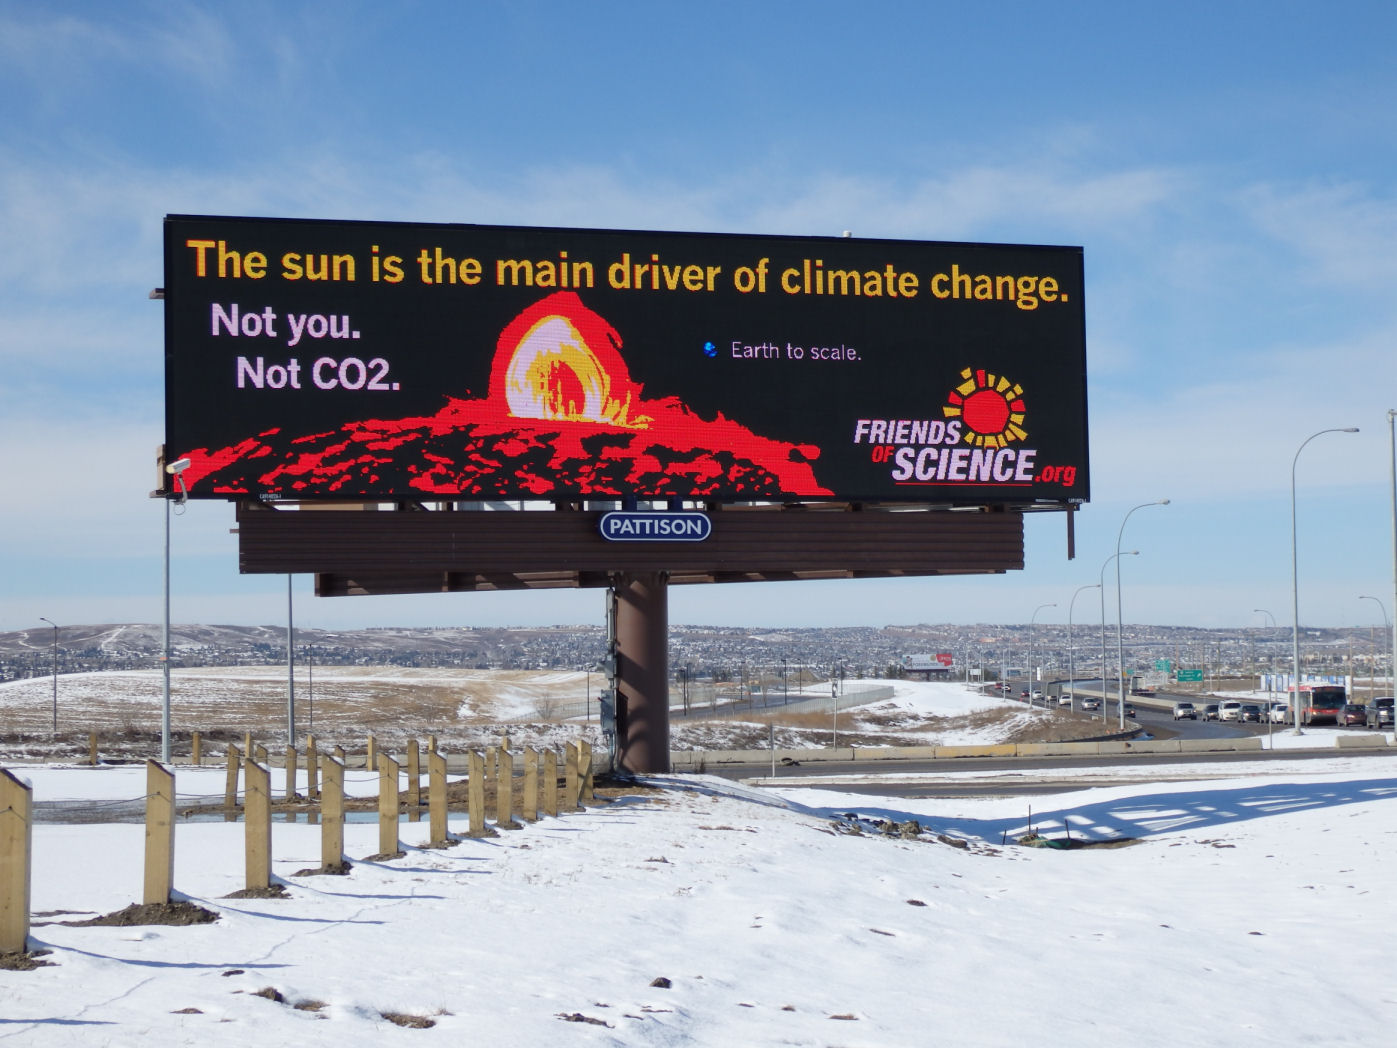 climate science friends denial billboard canadian change economic alberta yyc creditor coal bankruptcy named giant welcome sun co2 deniers driver